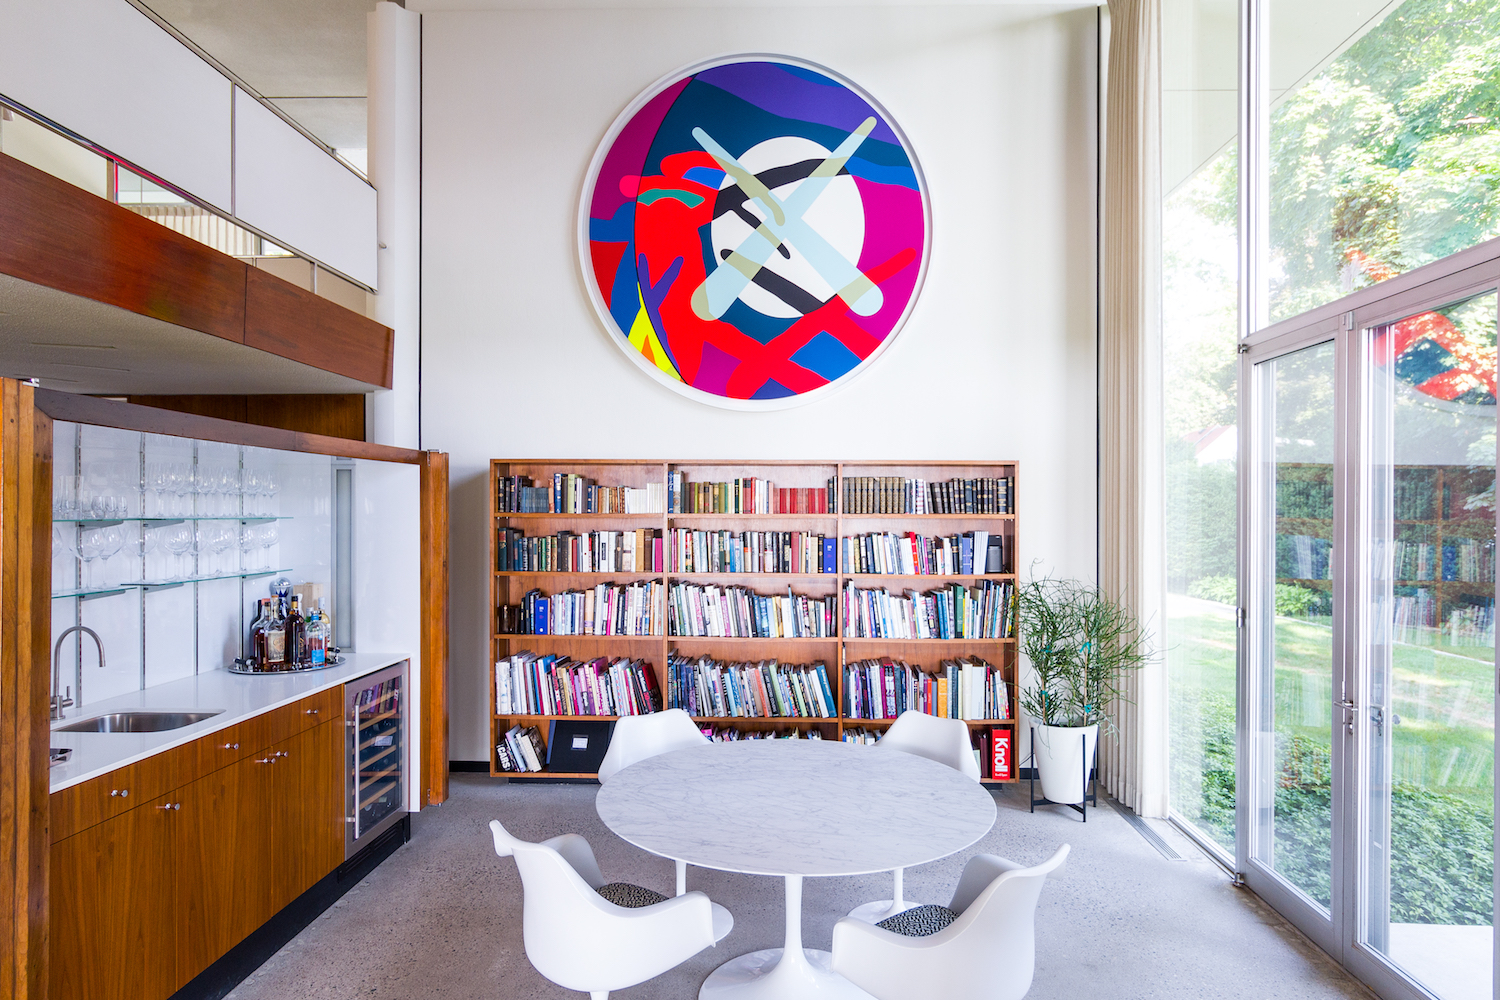 A large-scale tondo by KAWS’ hung above the bookcase, photo by Alessandra Ferrara, courtesy of Library Street Collective.